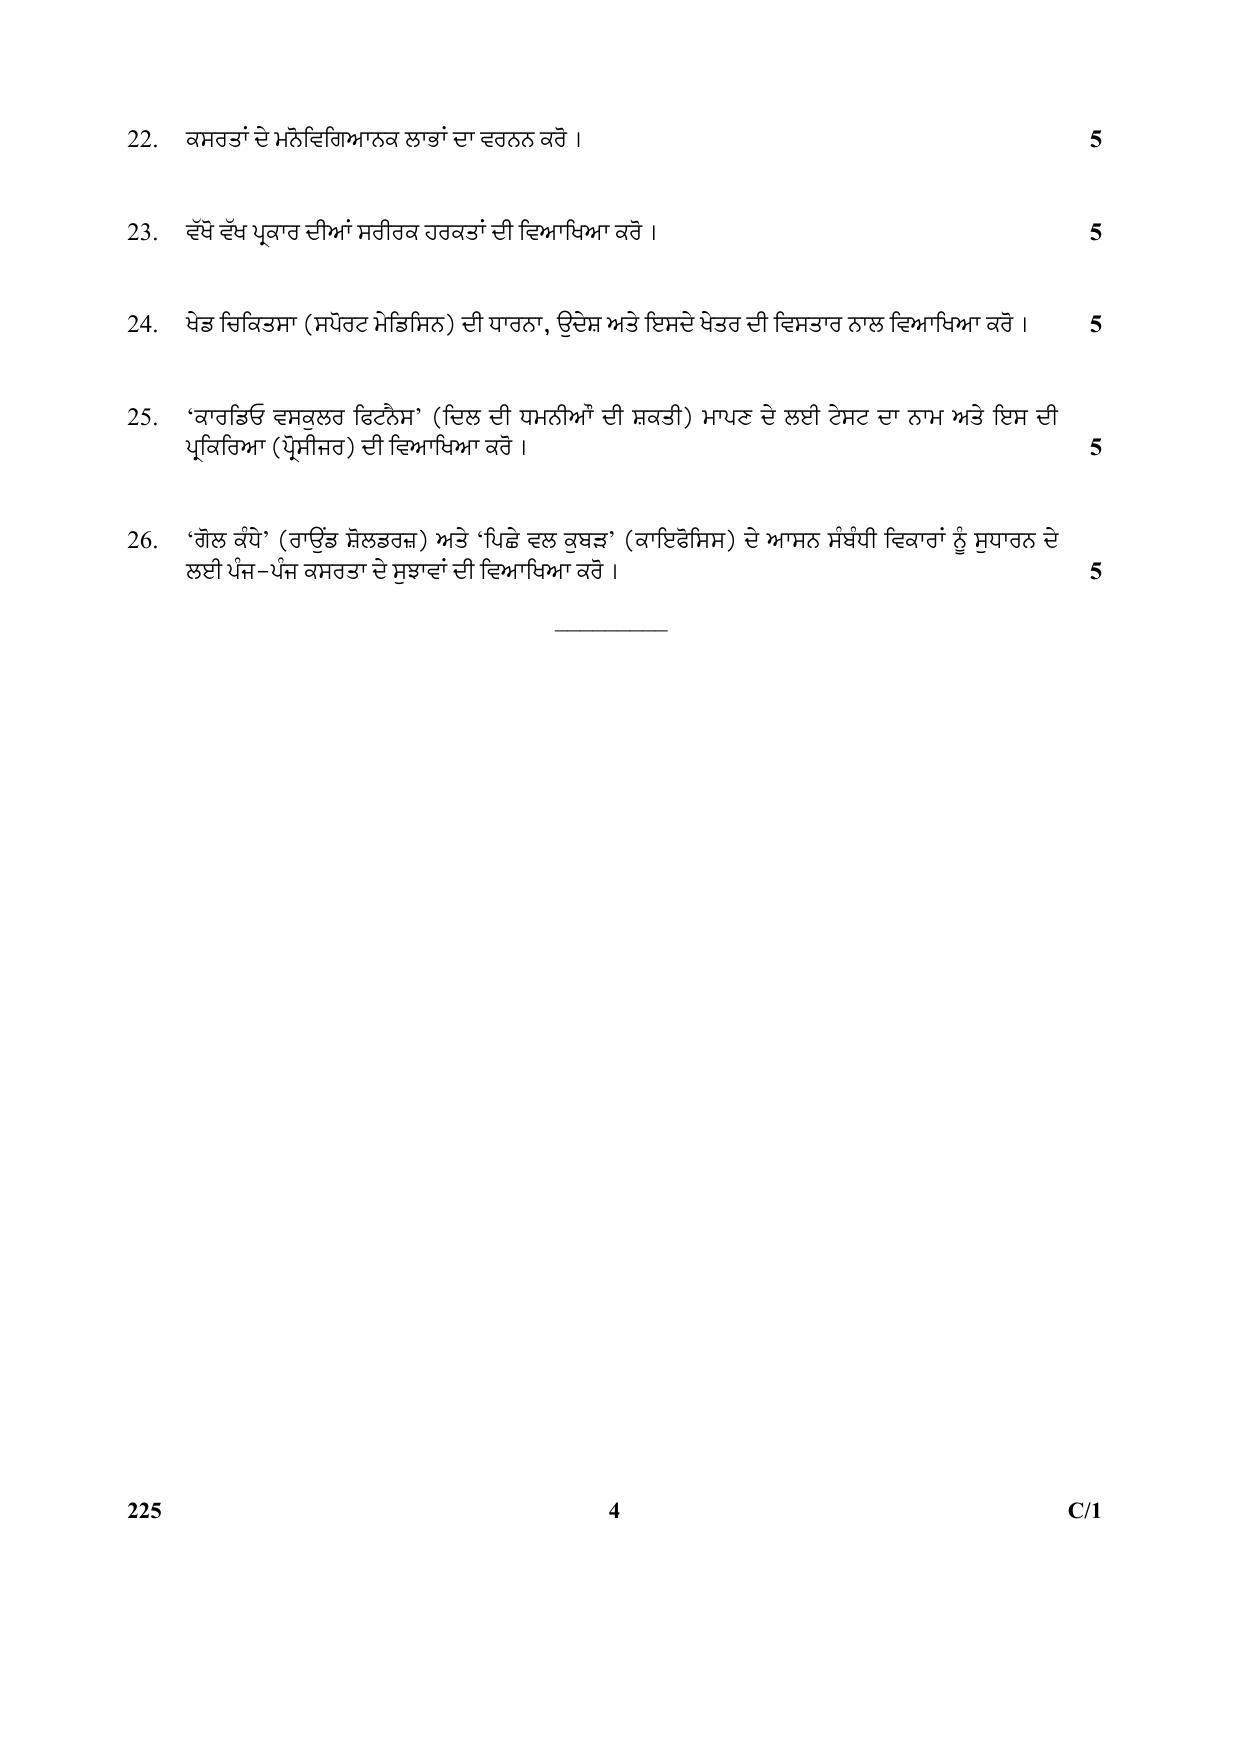 CBSE Class 12 225 & 75 (Physical Education Theory) 2018 Compartment Question Paper - Page 4